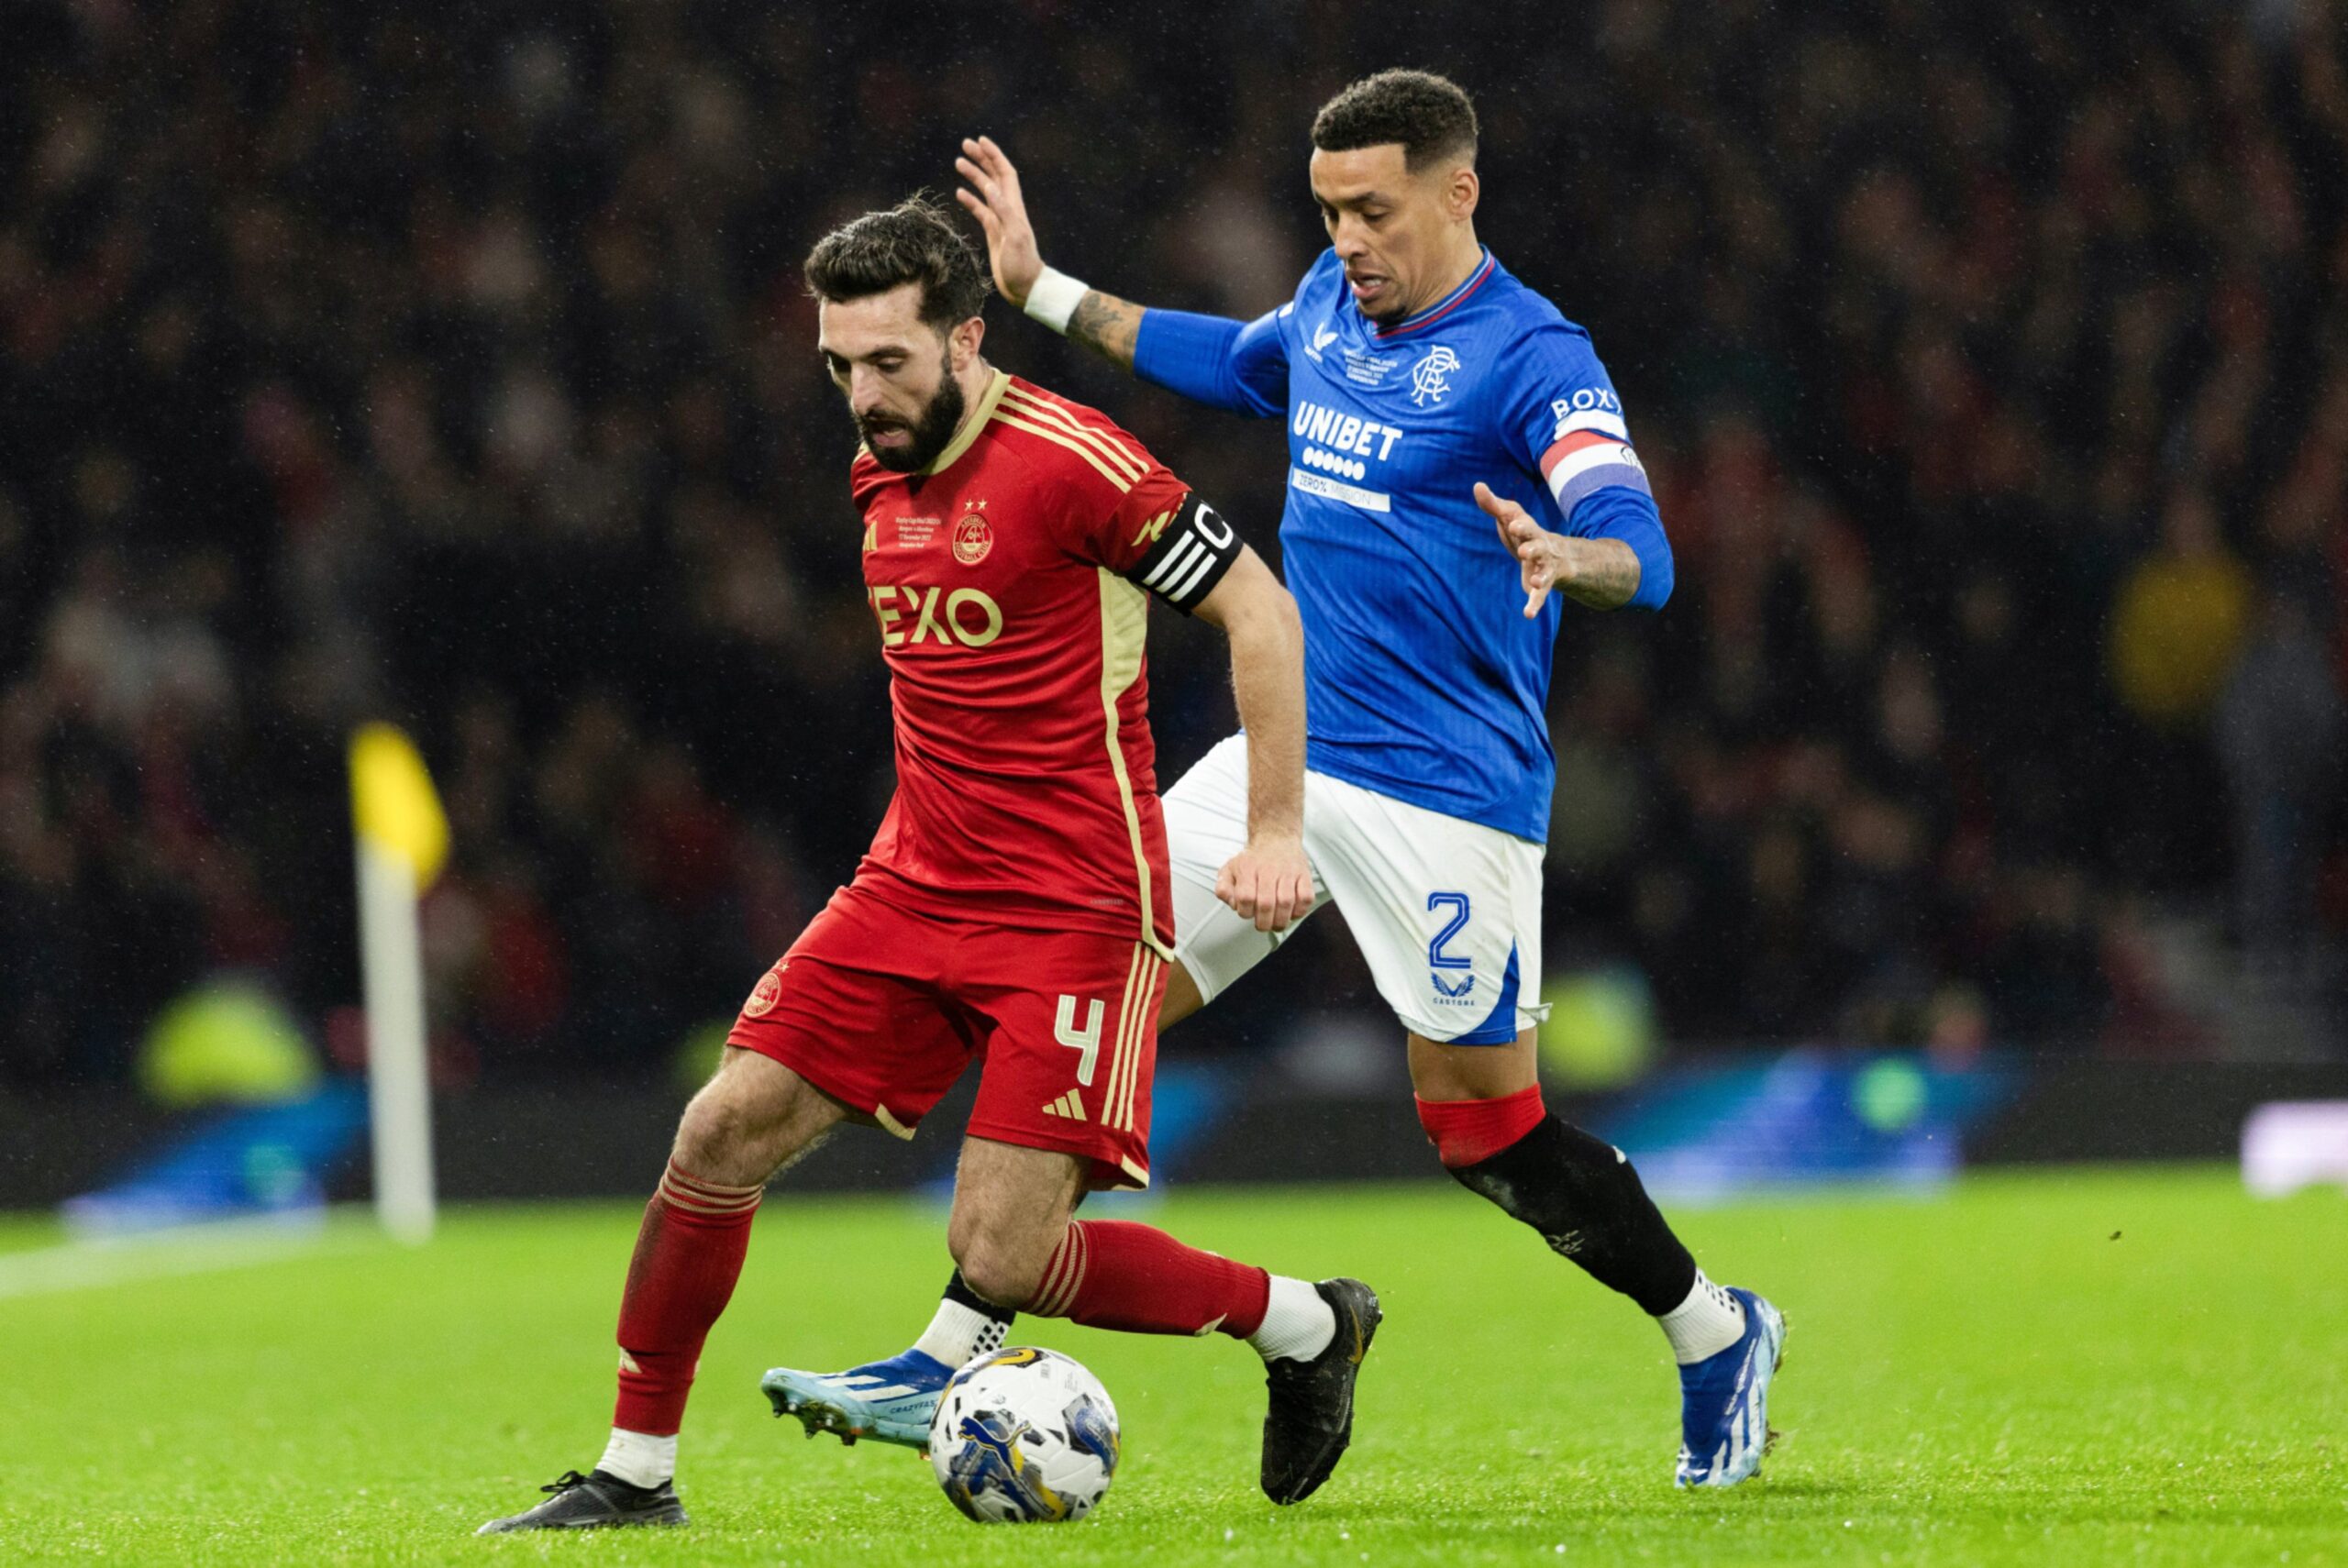 Aberdeen's Graeme Shinnie and Rangers' James Tavernier competing for the ball